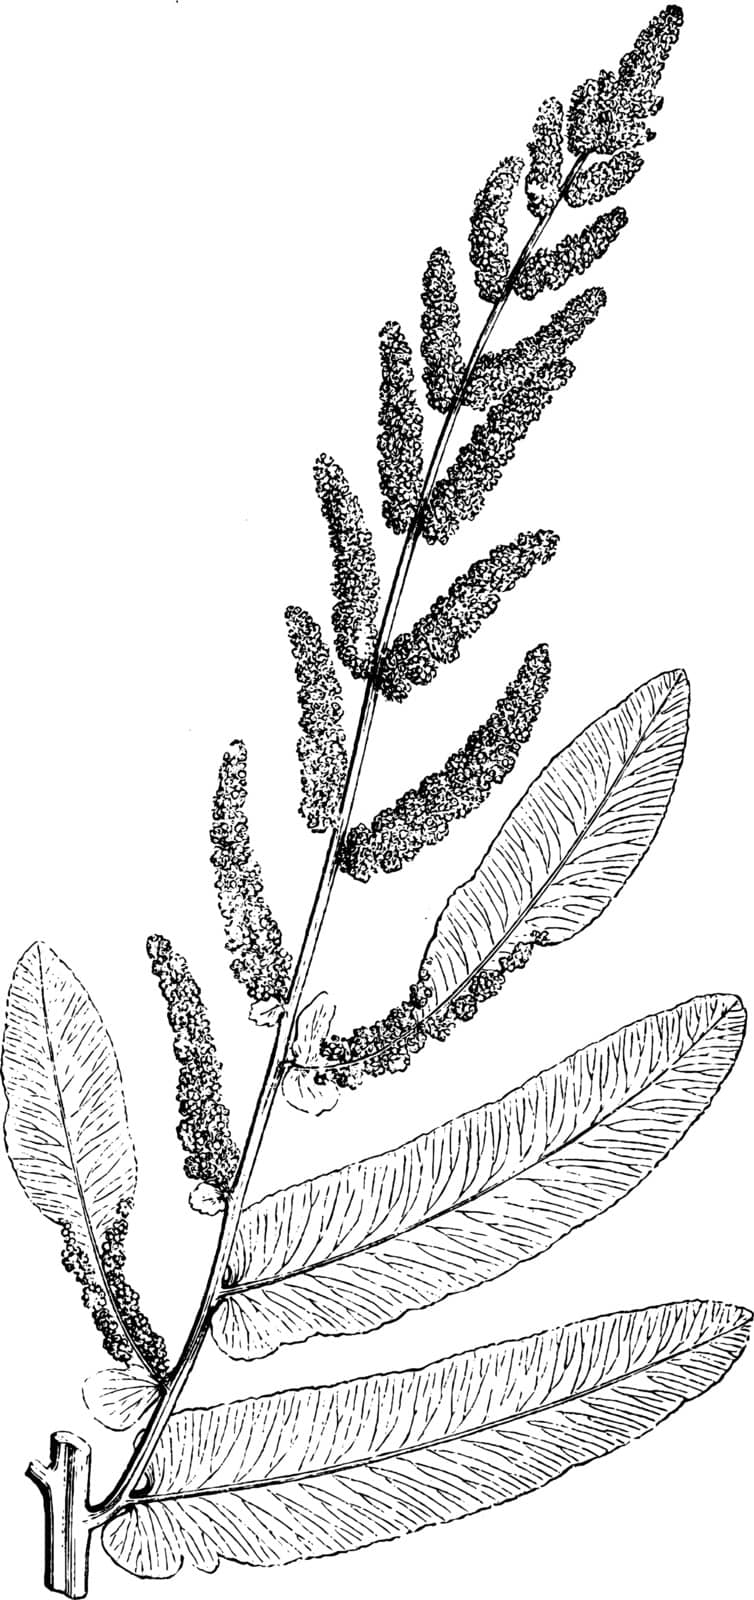 The Royal fern is known as osmunda regalis. It easy to grows up to 6 feet tall and 3 feet wide, vintage line drawing or engraving illustration.